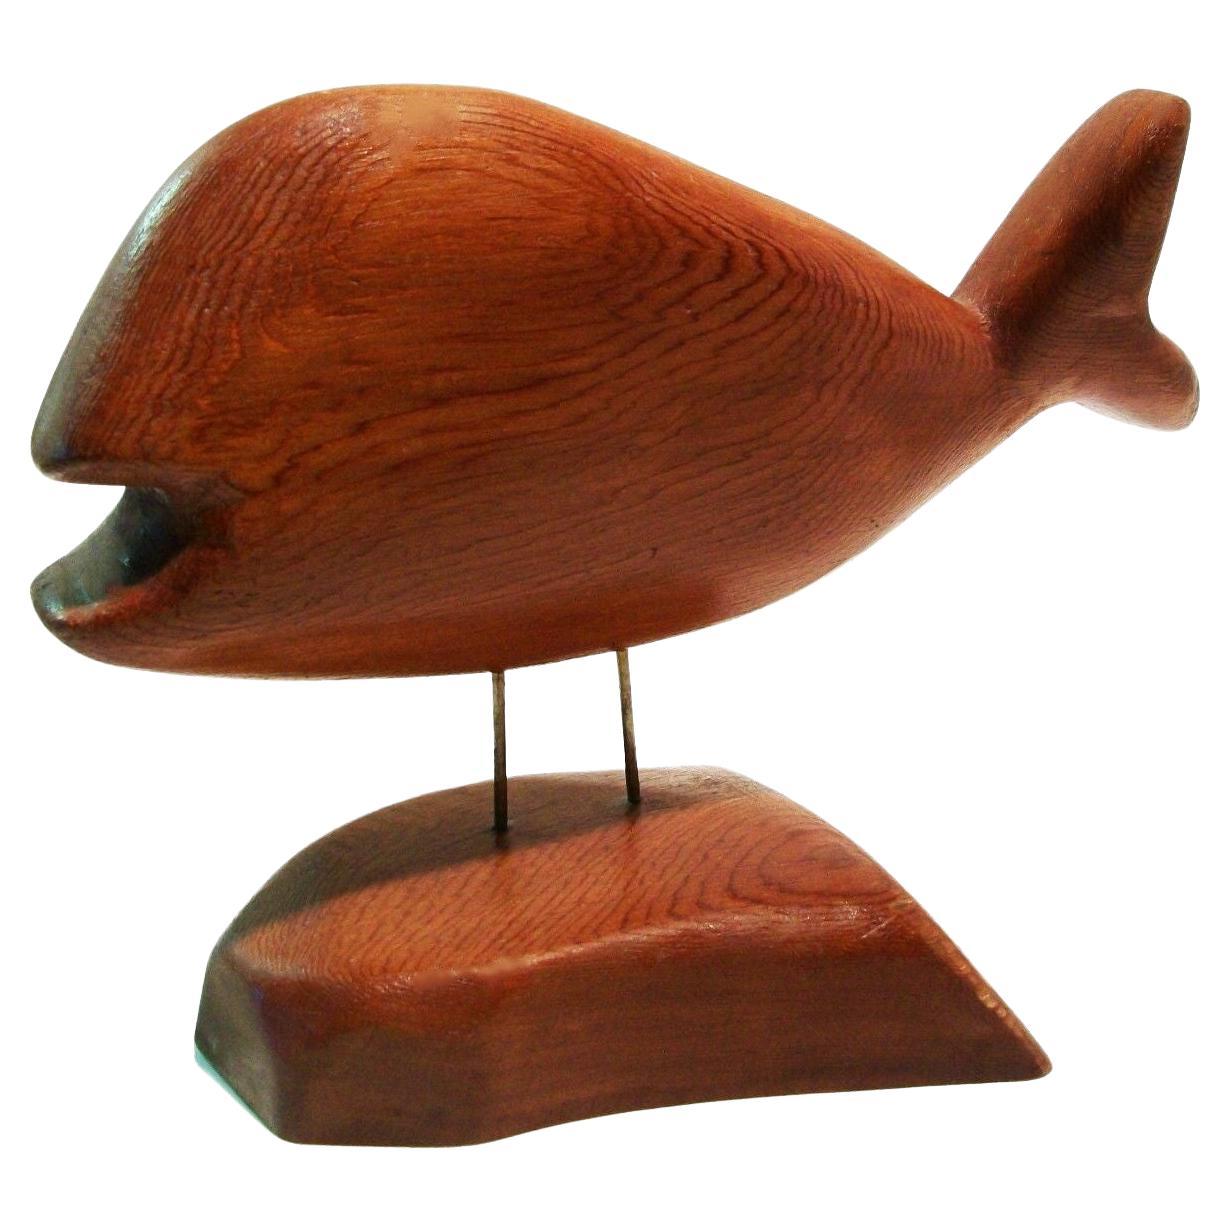 MIKE MATAS - Vintage Folk Art Whale Carving on Stand - Signed - Canada - C. 1980 im Angebot